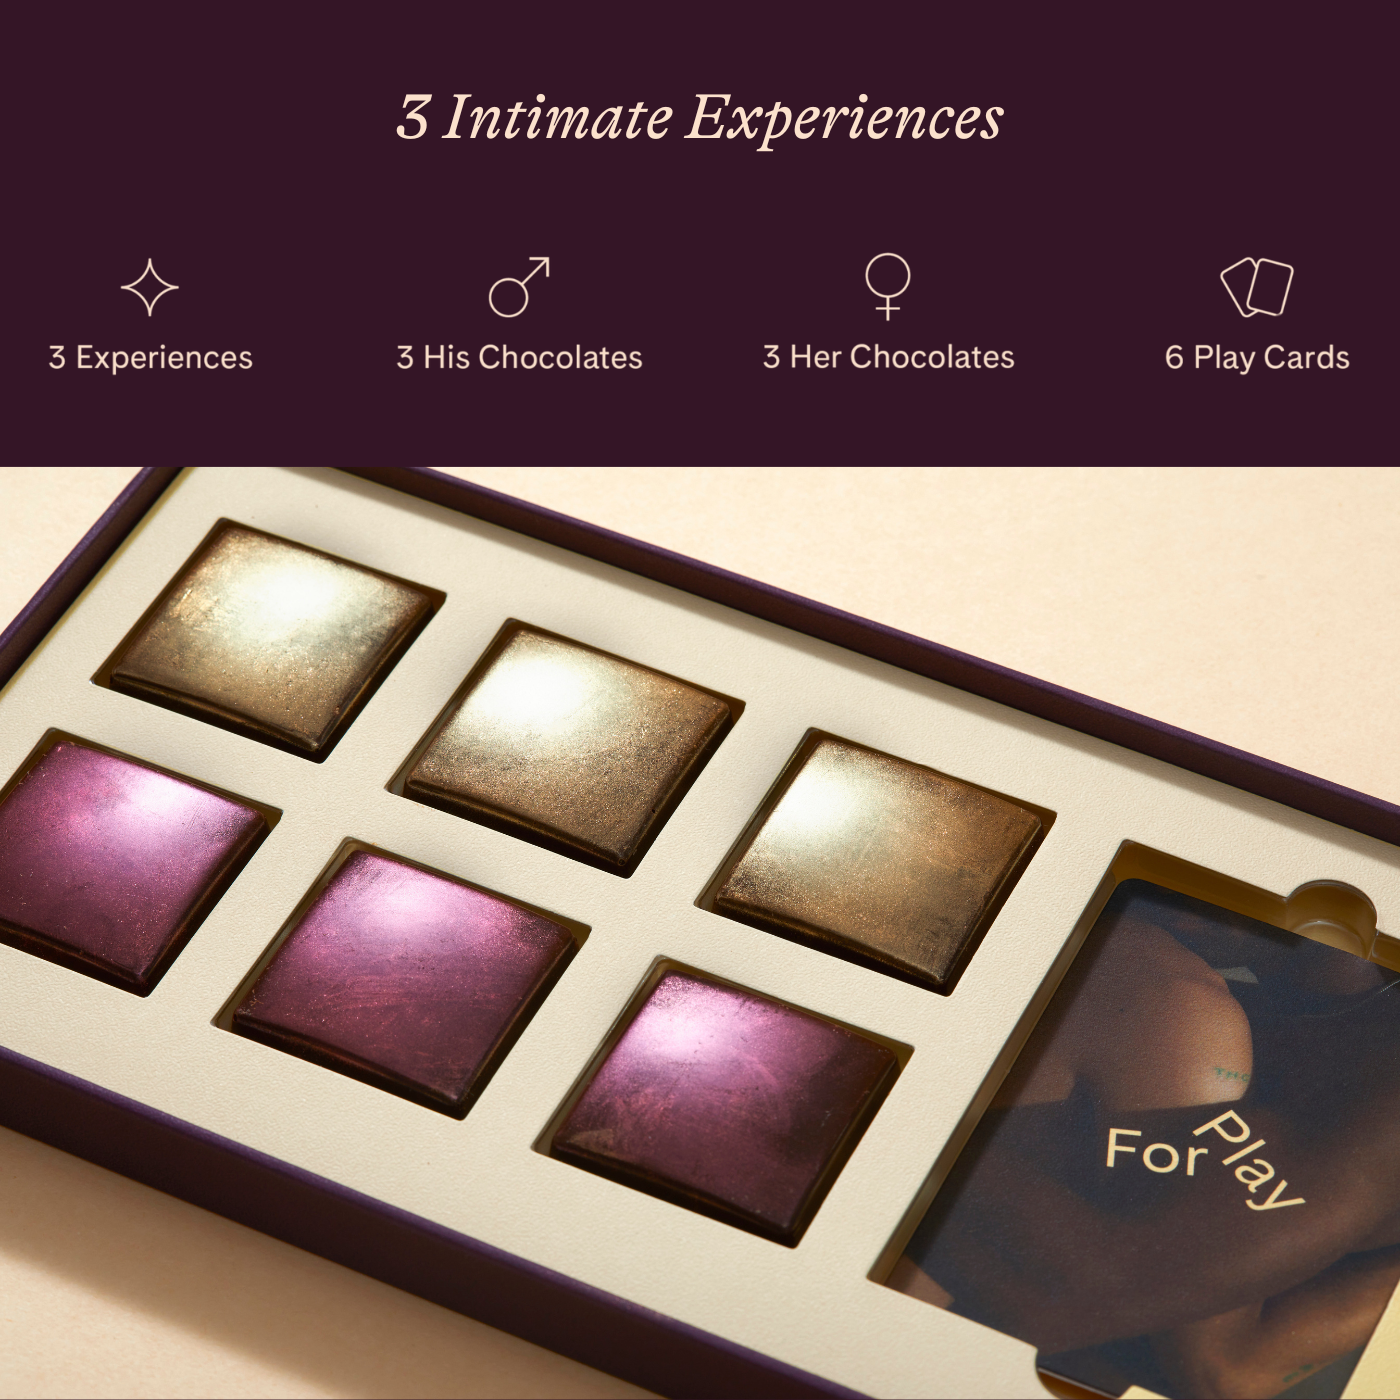 46 Intimacy With Tabs Chocolate ideas  intimacy, relationship advice,  relationship goals